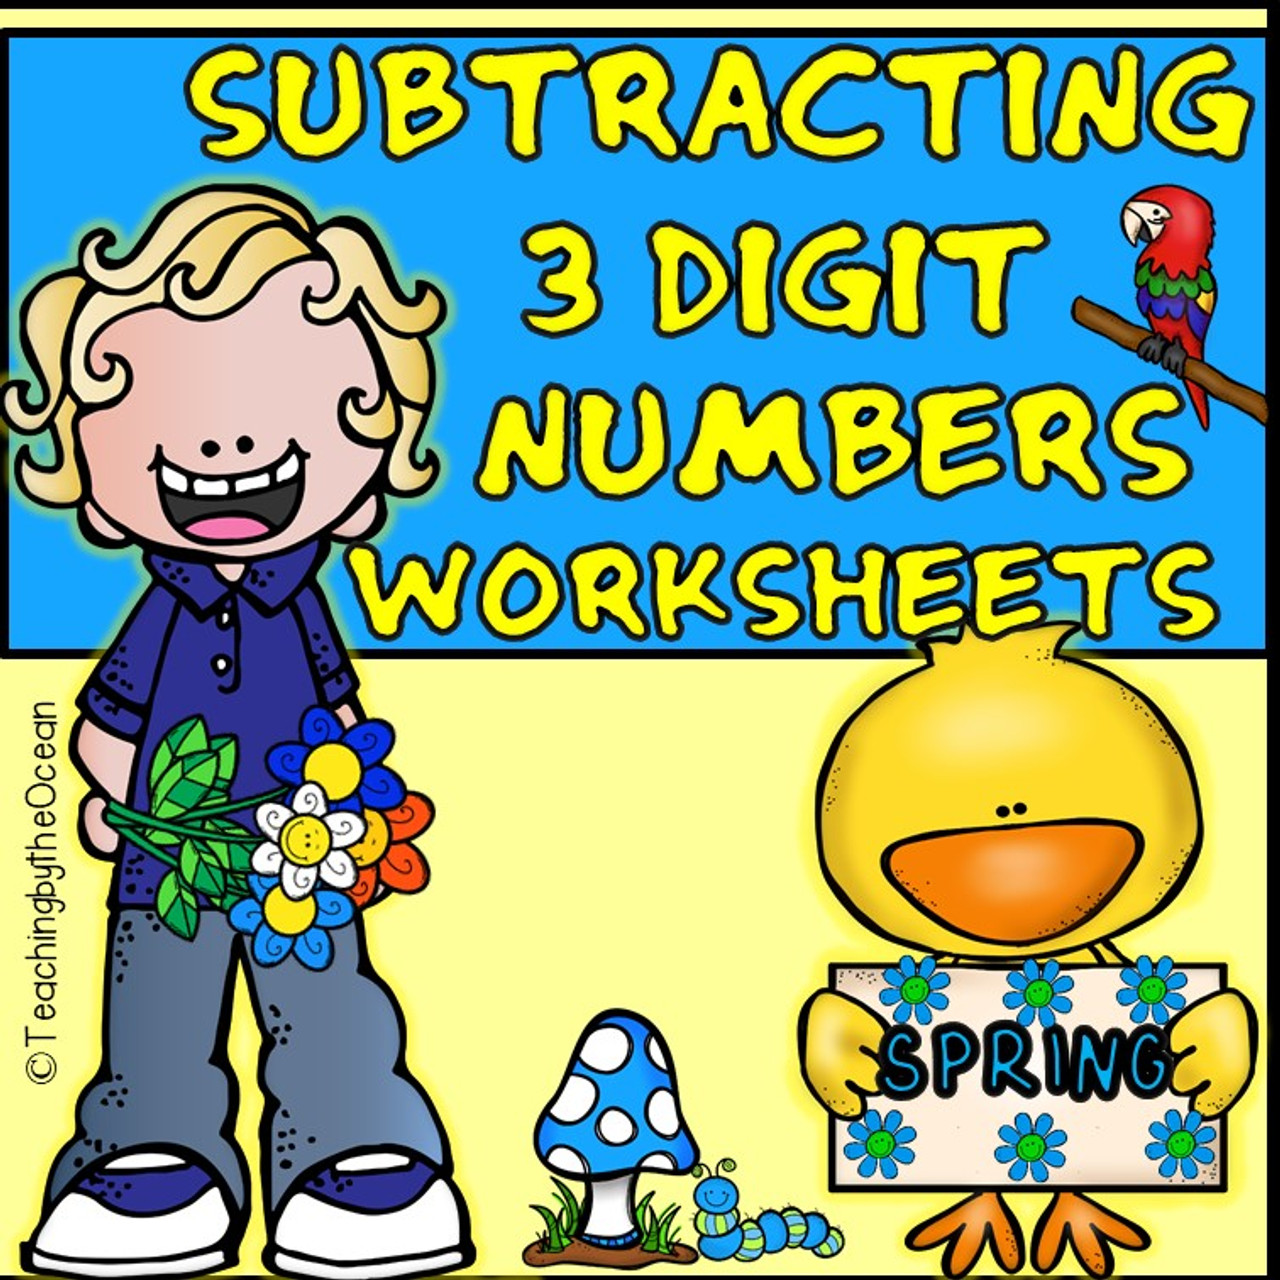 Subtracting 3 Digit Numbers Worksheets - Spring Themed